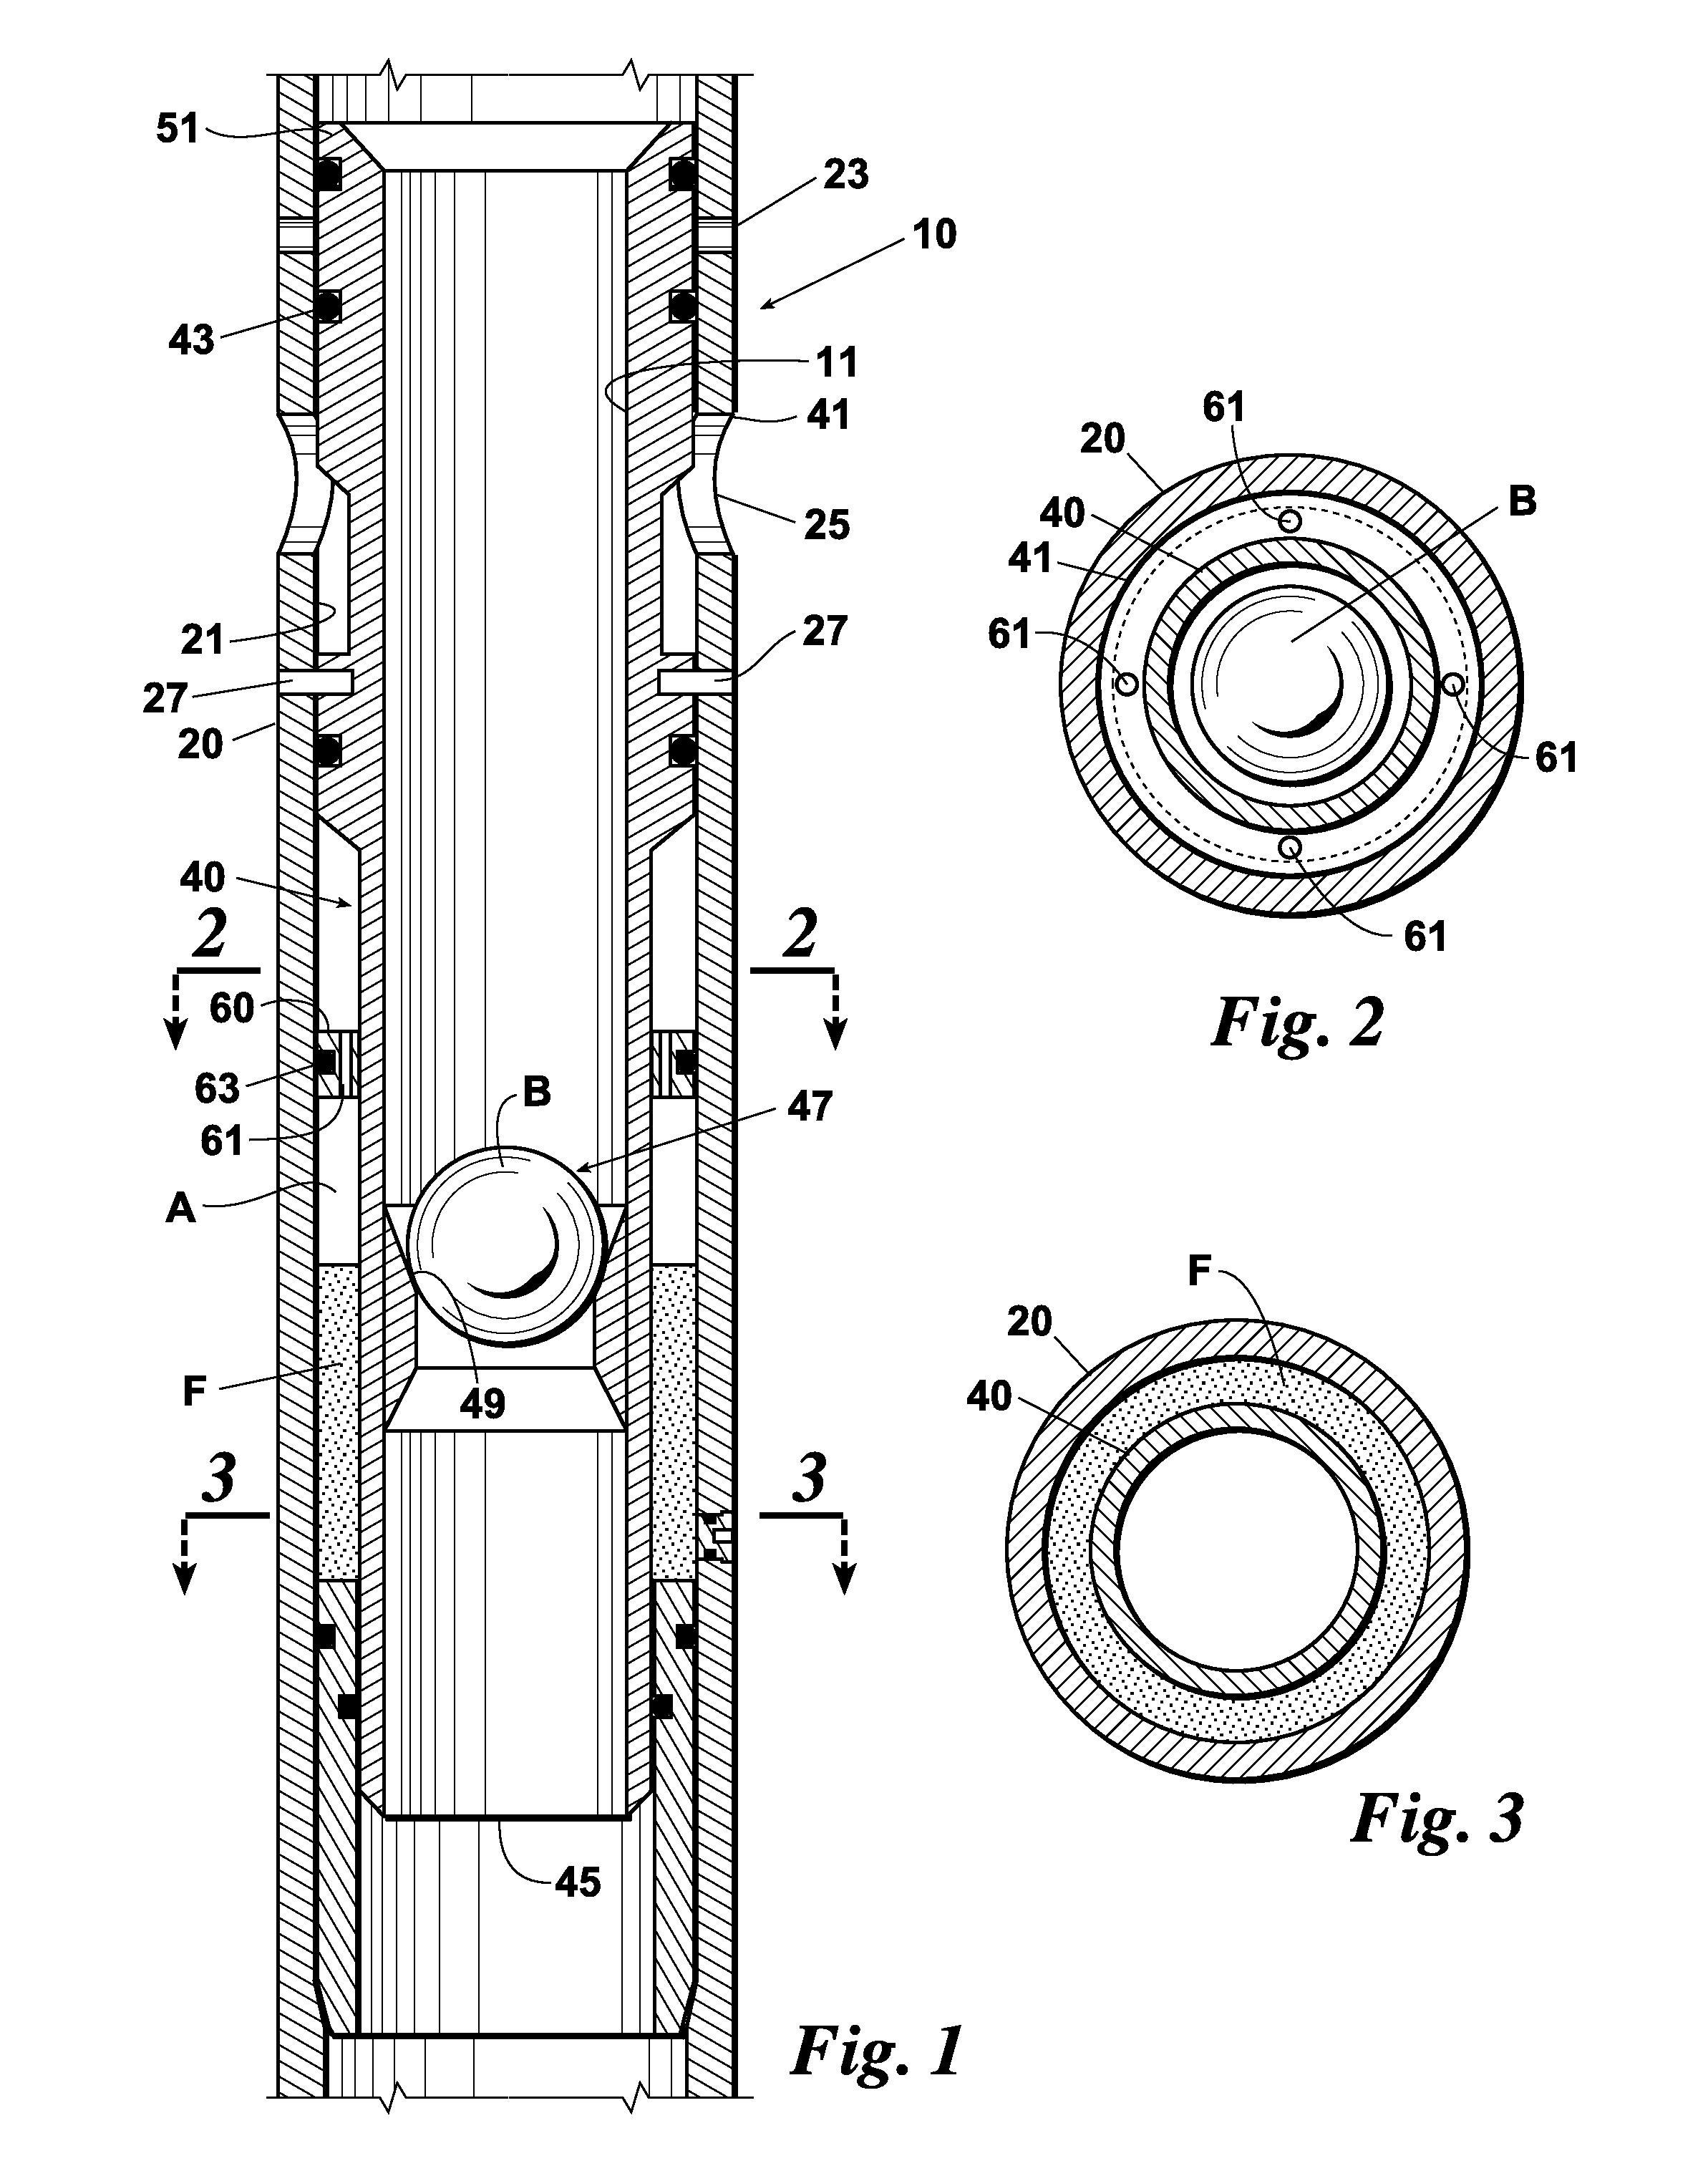 Pressure response fracture port tool for use in hydraulic fracturing applications